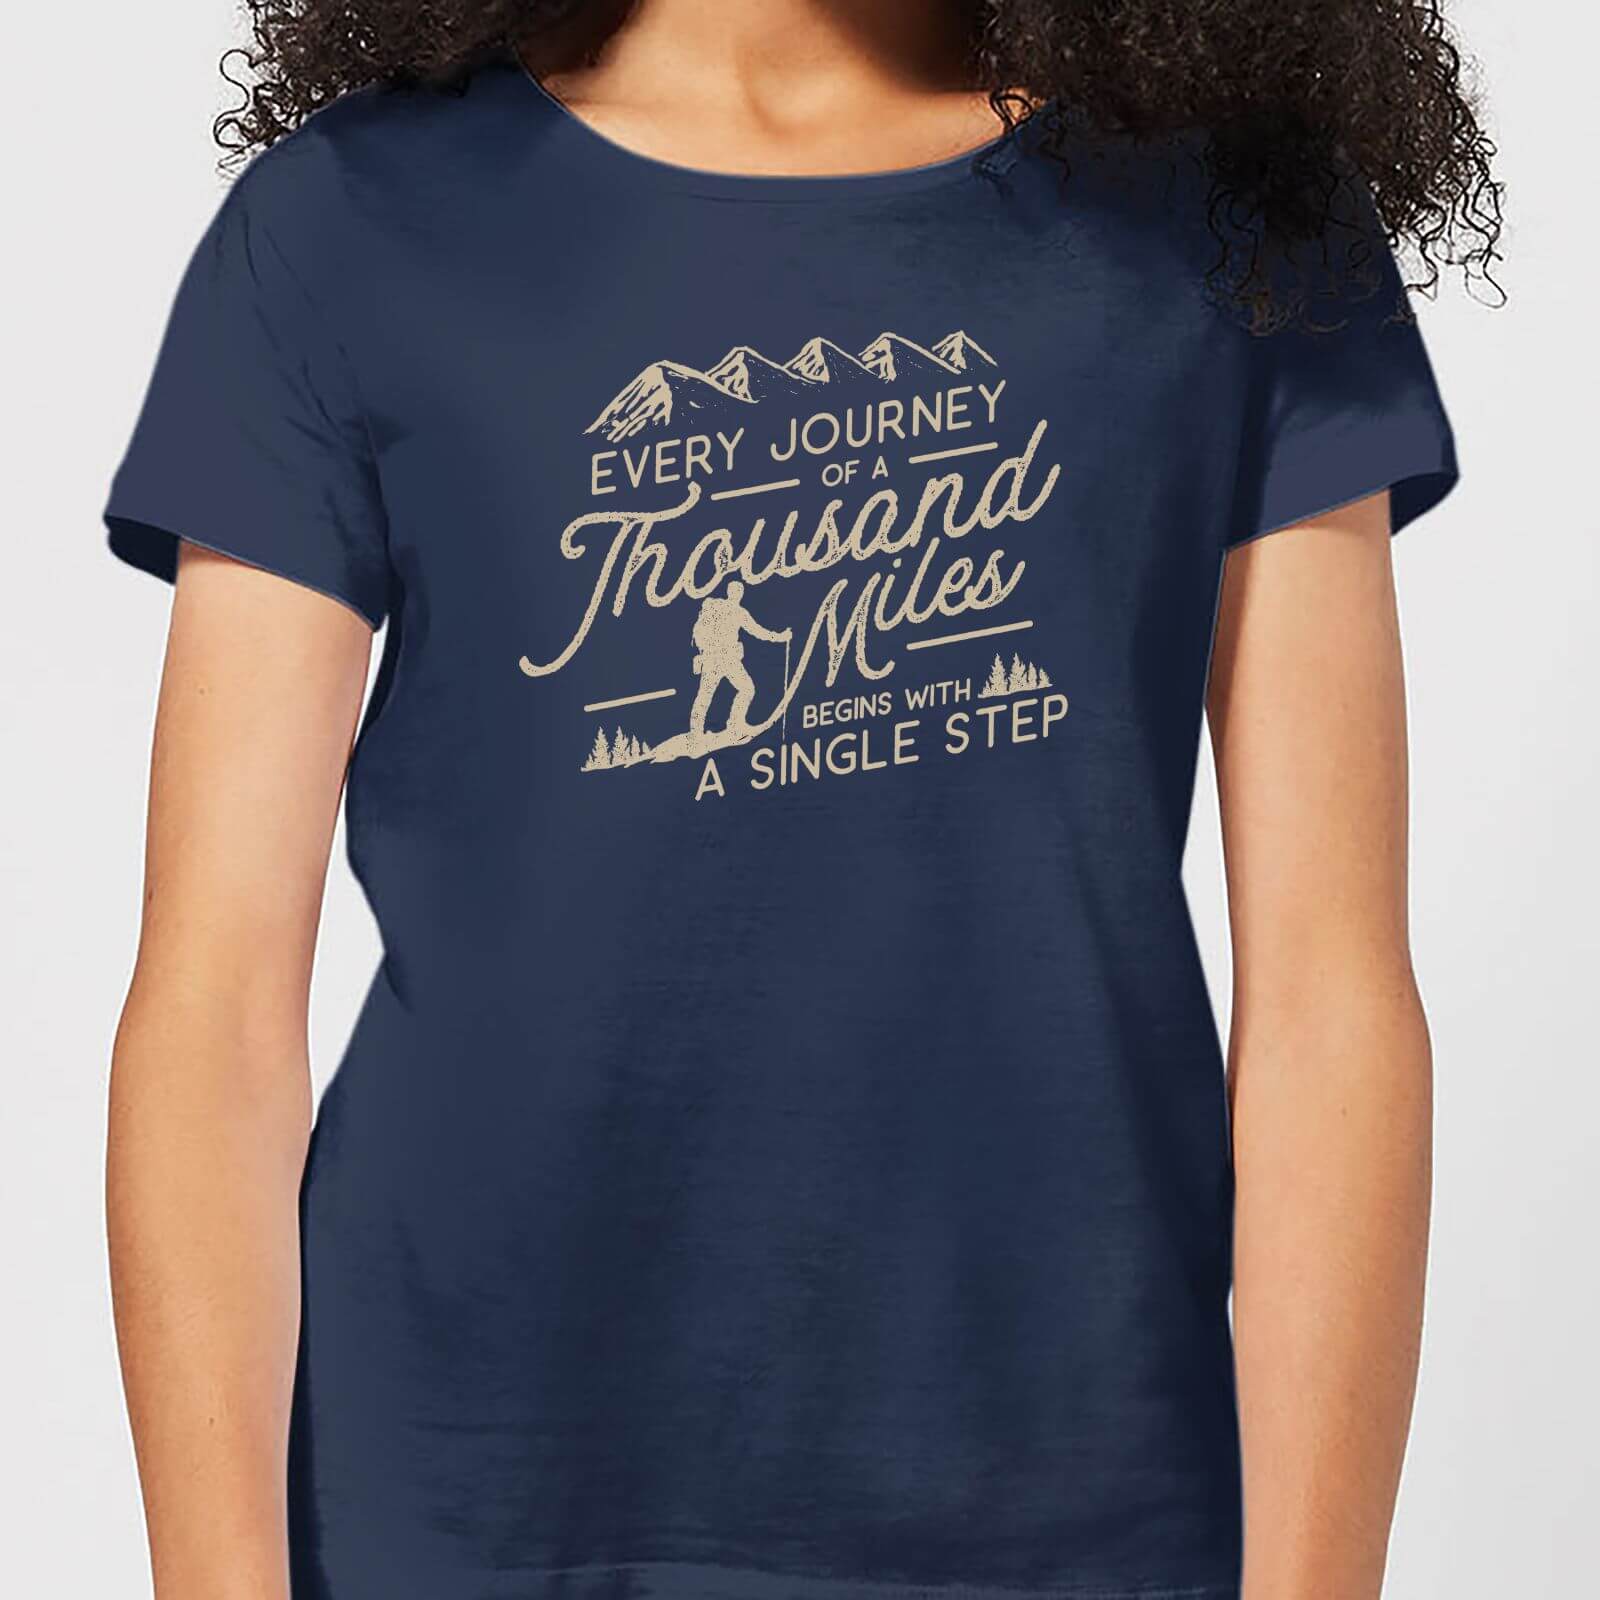 Every Journey Begins With A Single Step Women's T-Shirt - Navy - S - Navy